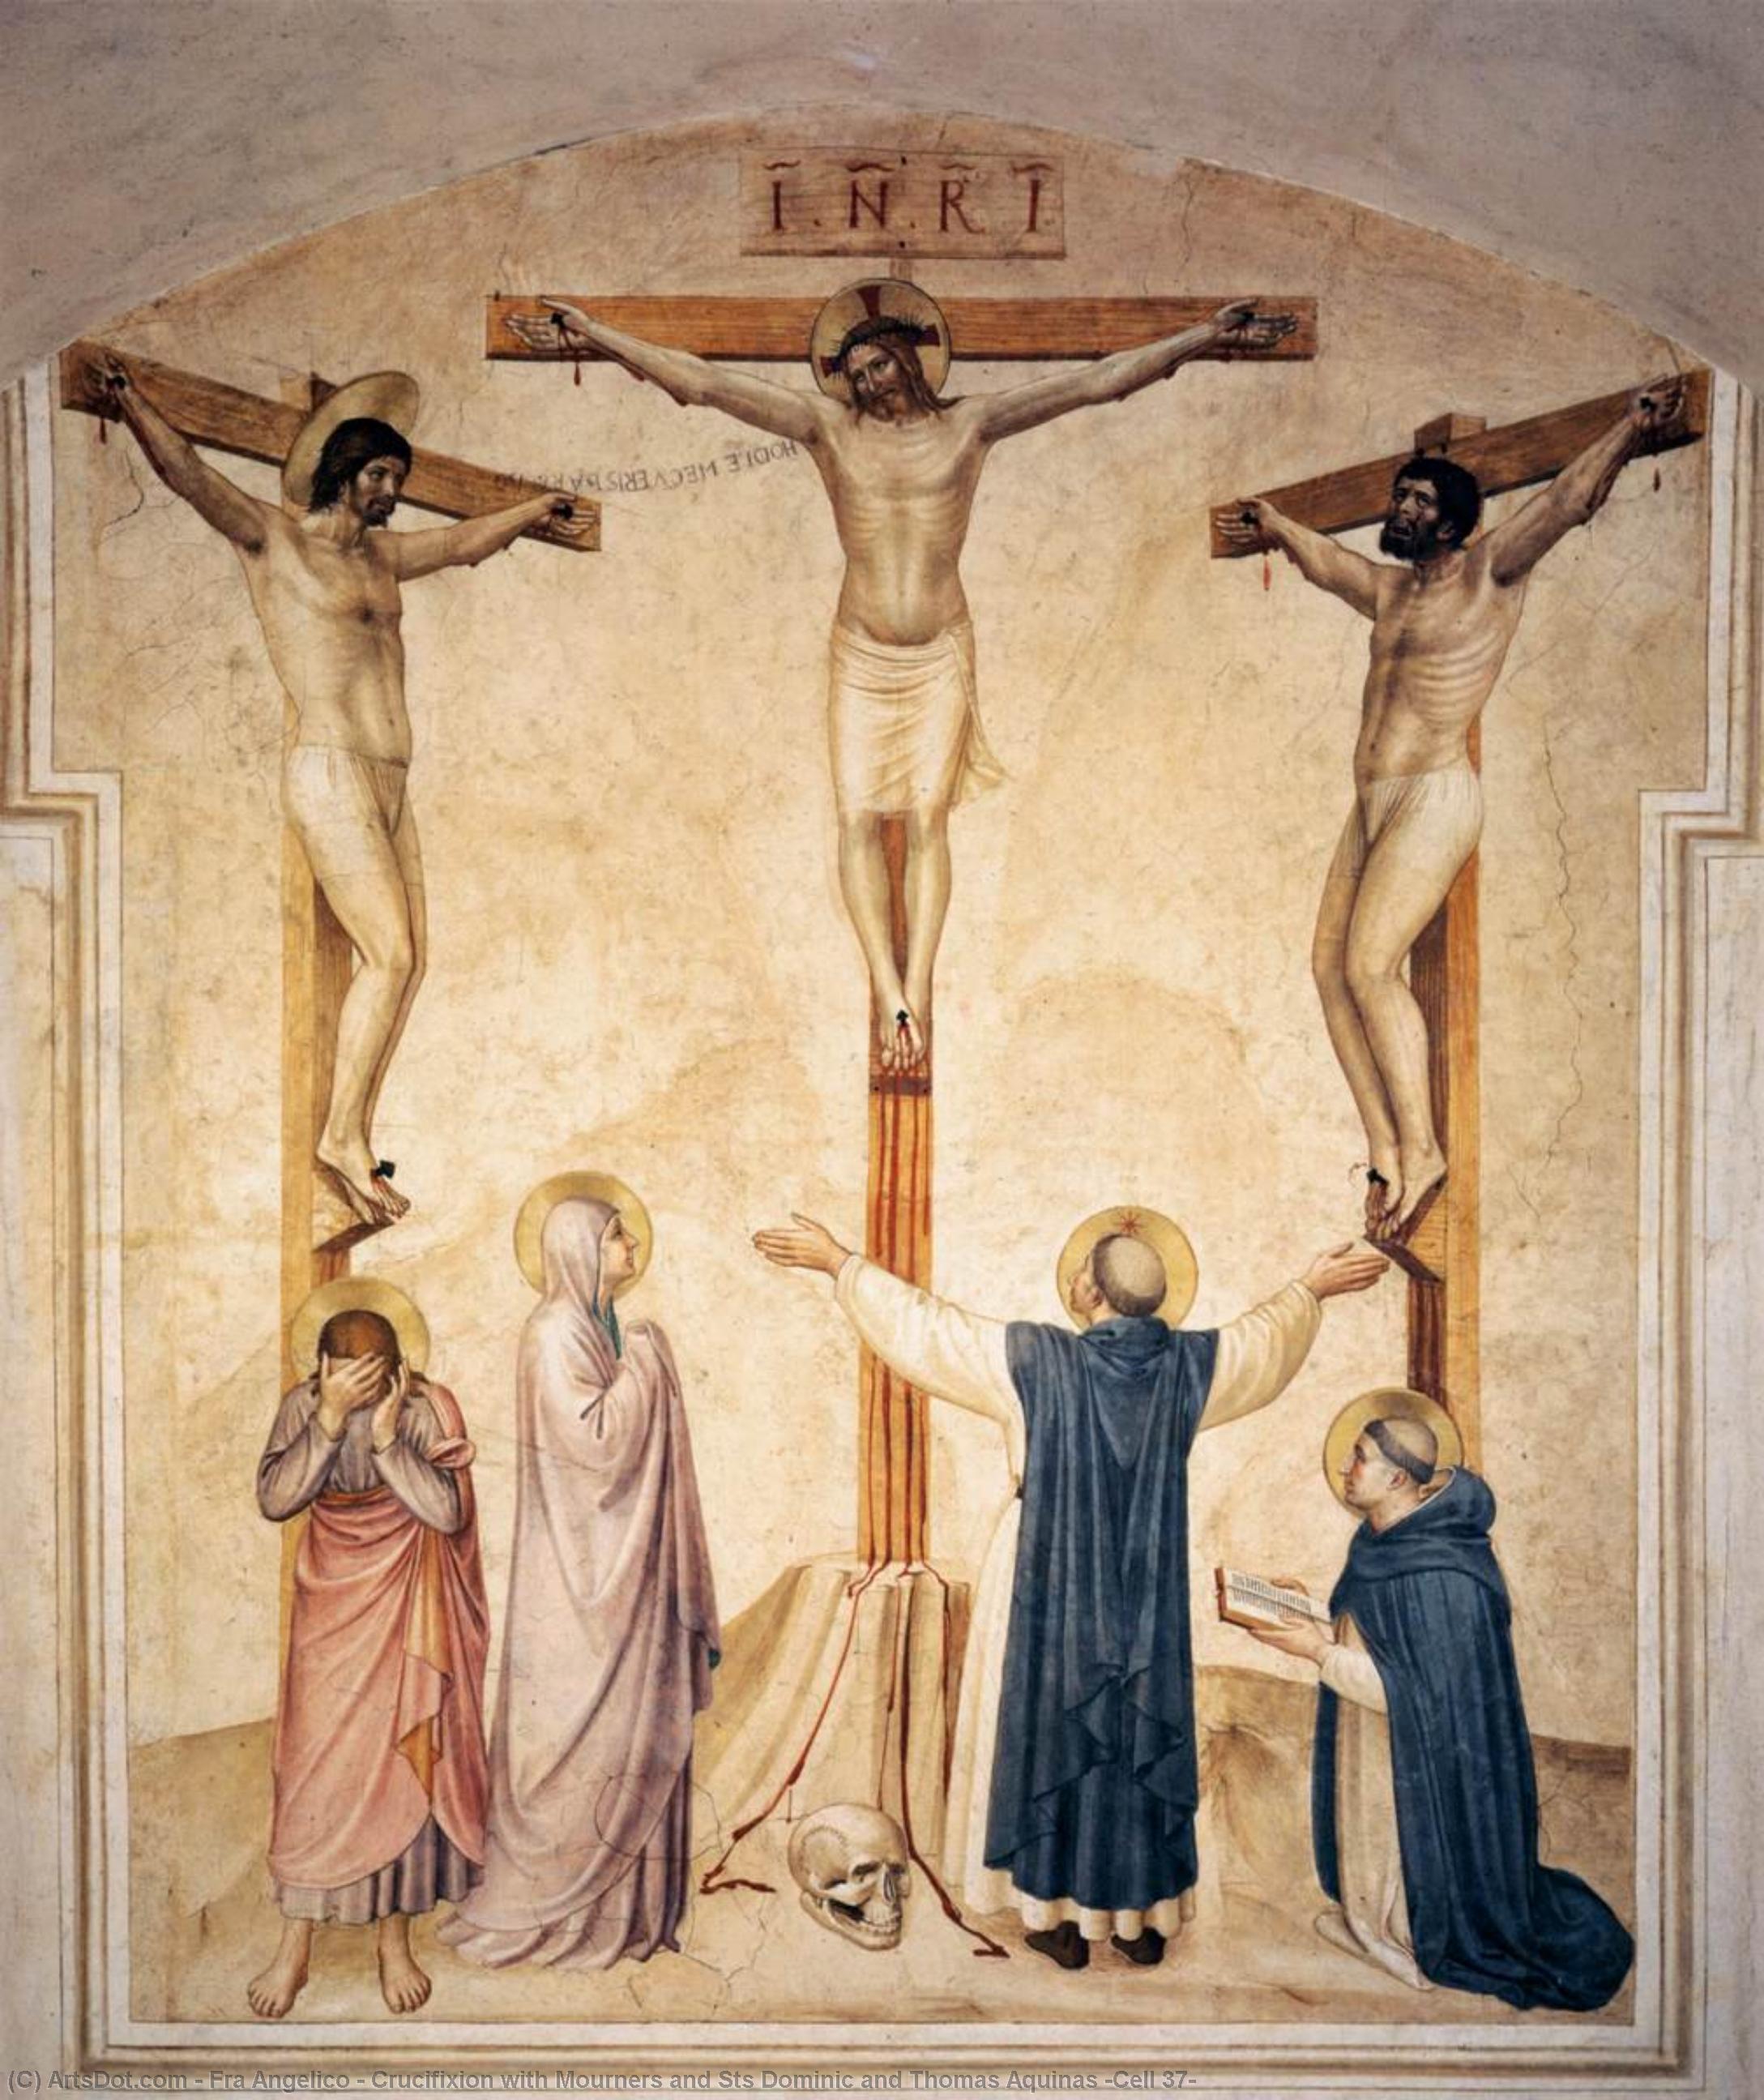 WikiOO.org - Encyclopedia of Fine Arts - Lukisan, Artwork Fra Angelico - Crucifixion with Mourners and Sts Dominic and Thomas Aquinas (Cell 37)